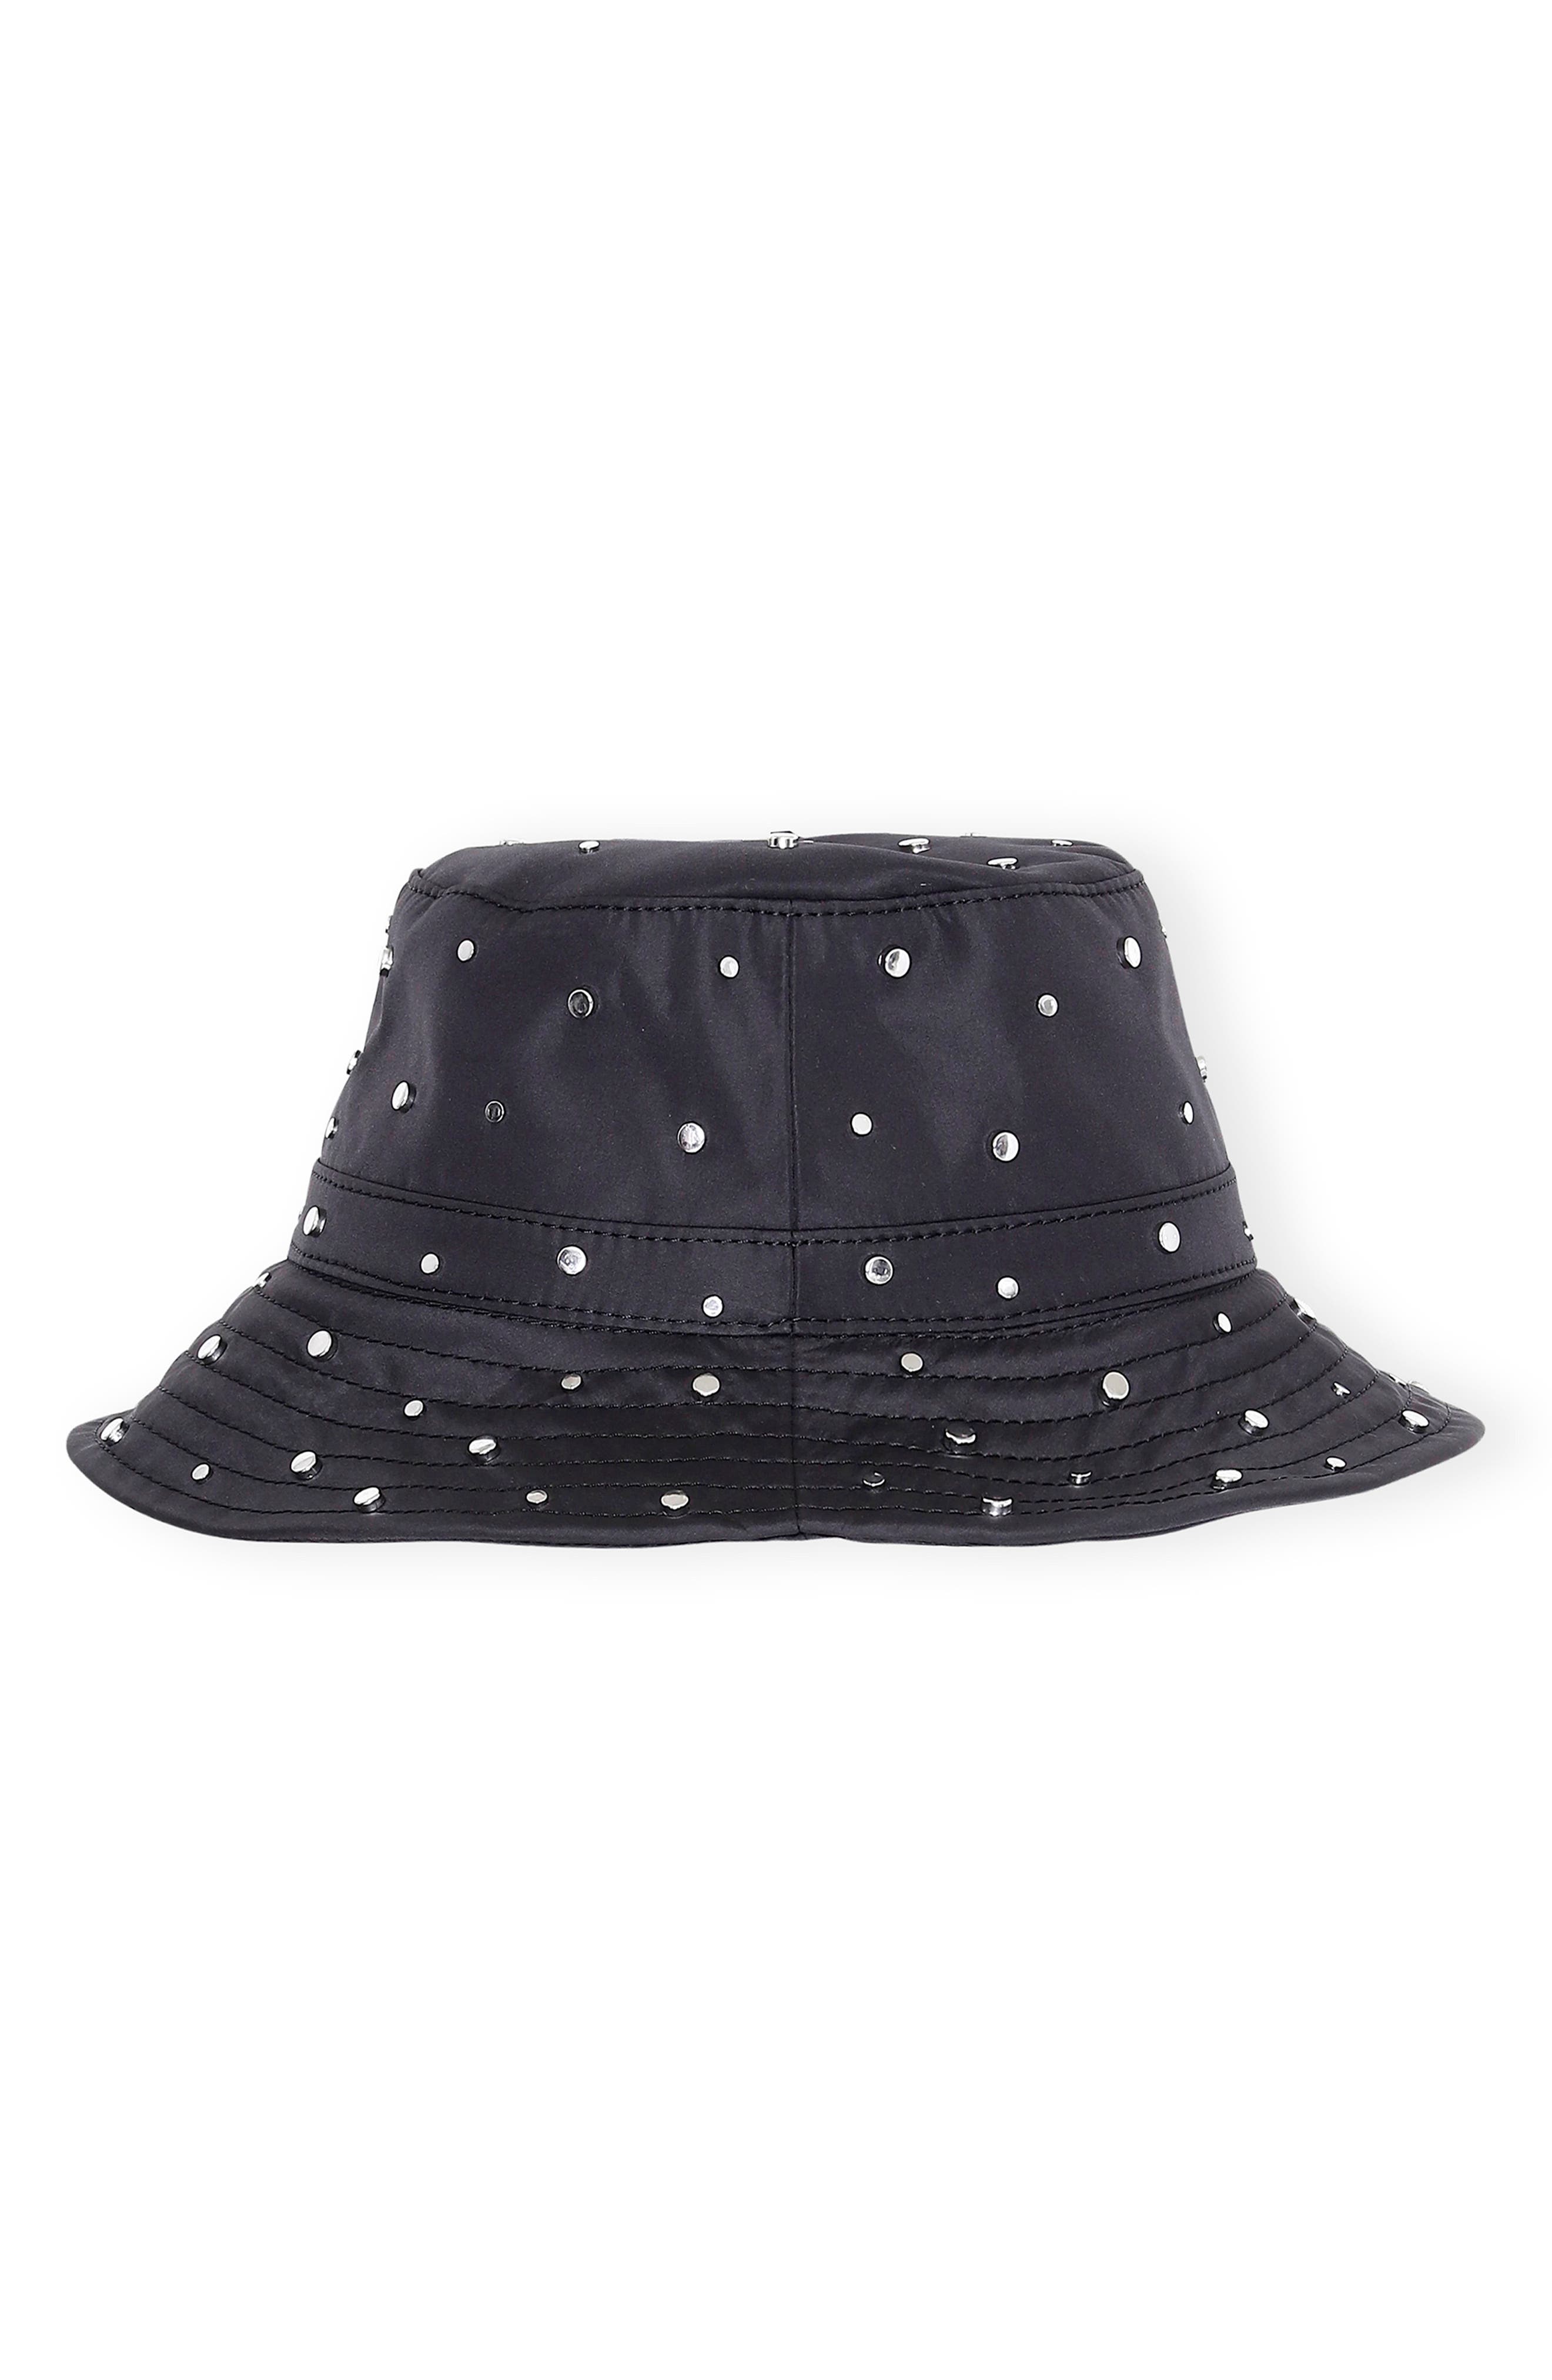 Ganni Studded Bucket Hat in Black at Nordstrom, Size X-Small